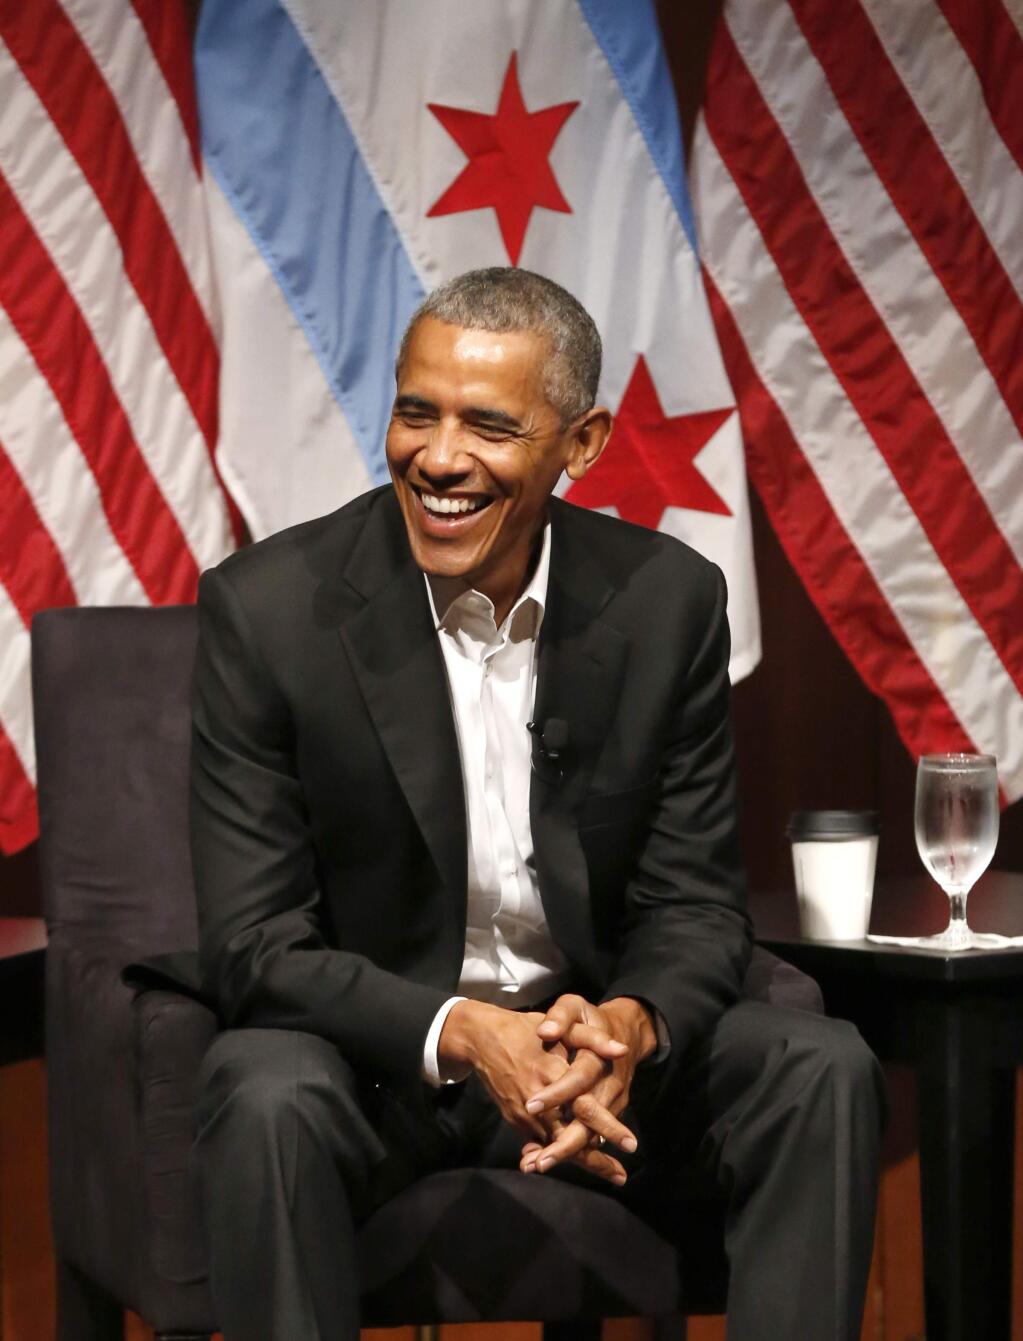 Former President Barack Obama smiles as he hosts a conversation on civic engagement and community organizing, Monday, April 24, 2017, at the University of Chicago in Chicago. It's the former president's first public event of his post-presidential life in the place where he started his political career. (AP Photo/Charles Rex Arbogast)